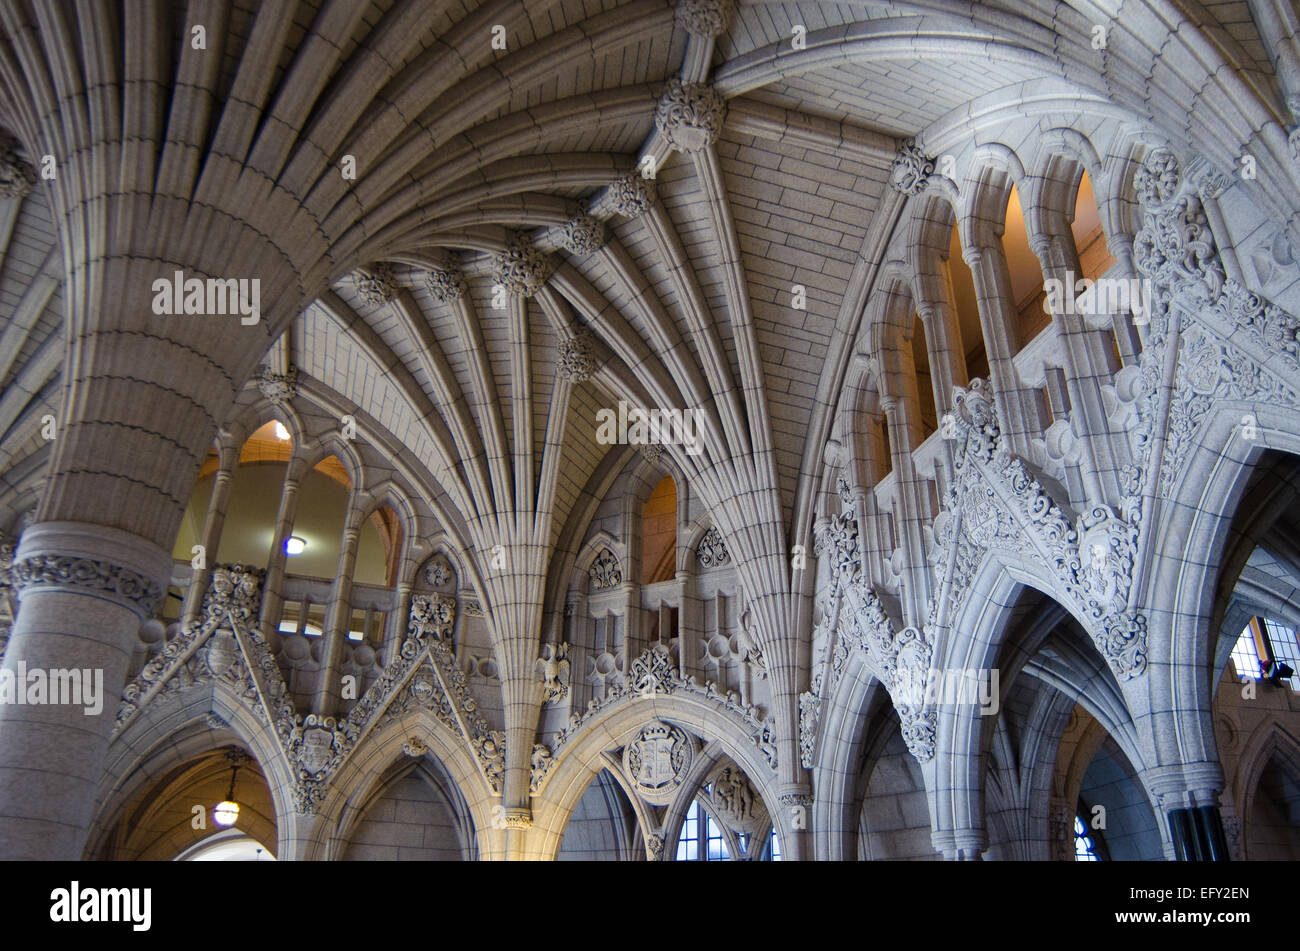 The ornate Gothic revival interior of the Parliament of Canada in Ottawa, Ontario. Stock Photo